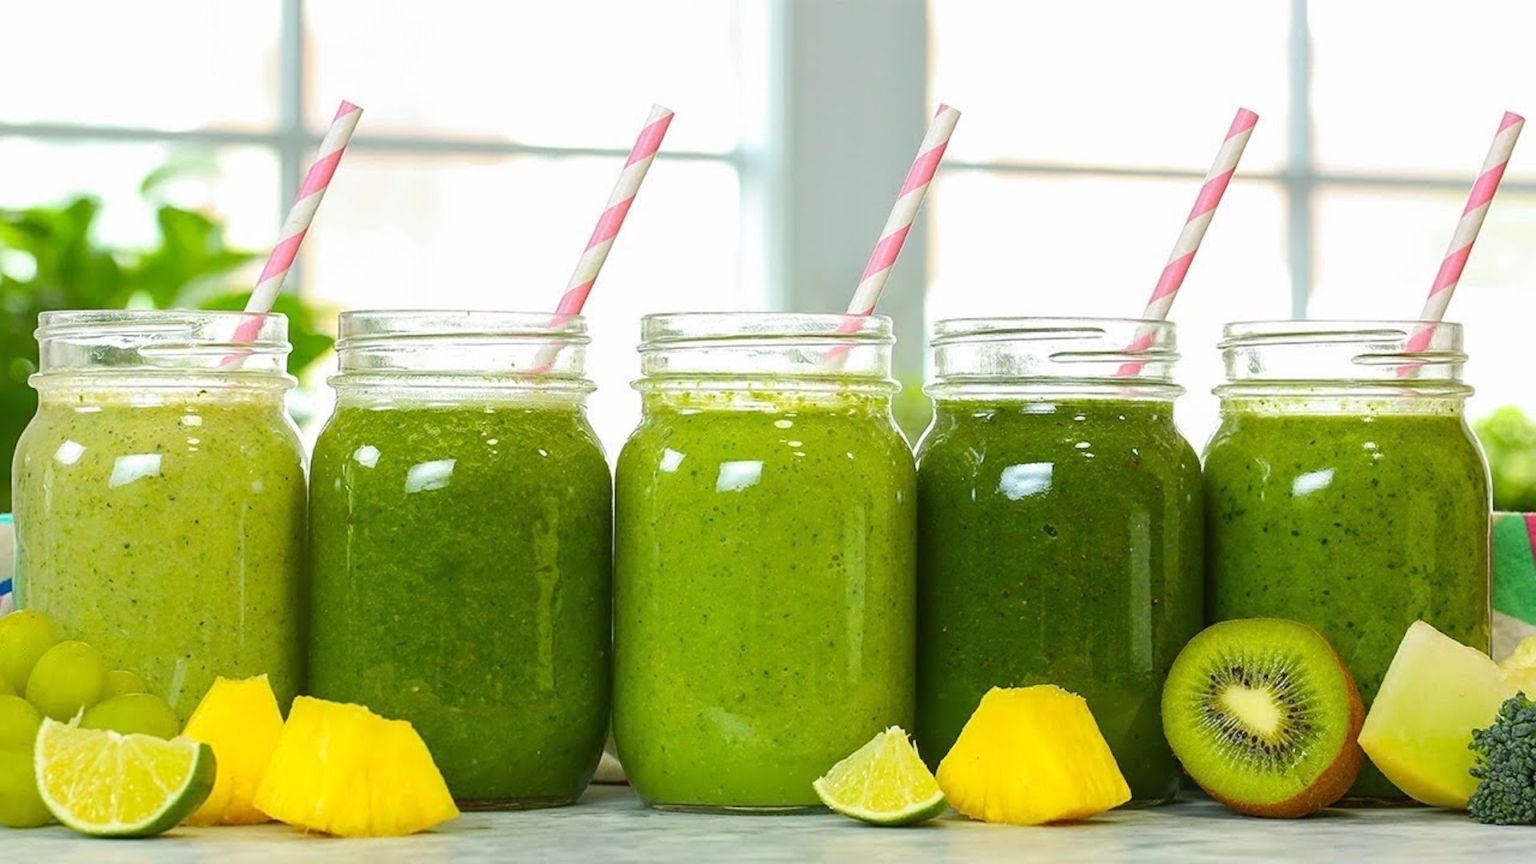 Glowing Green Smoothie Review: Emma and KG - GLW; Click here to learn how t...